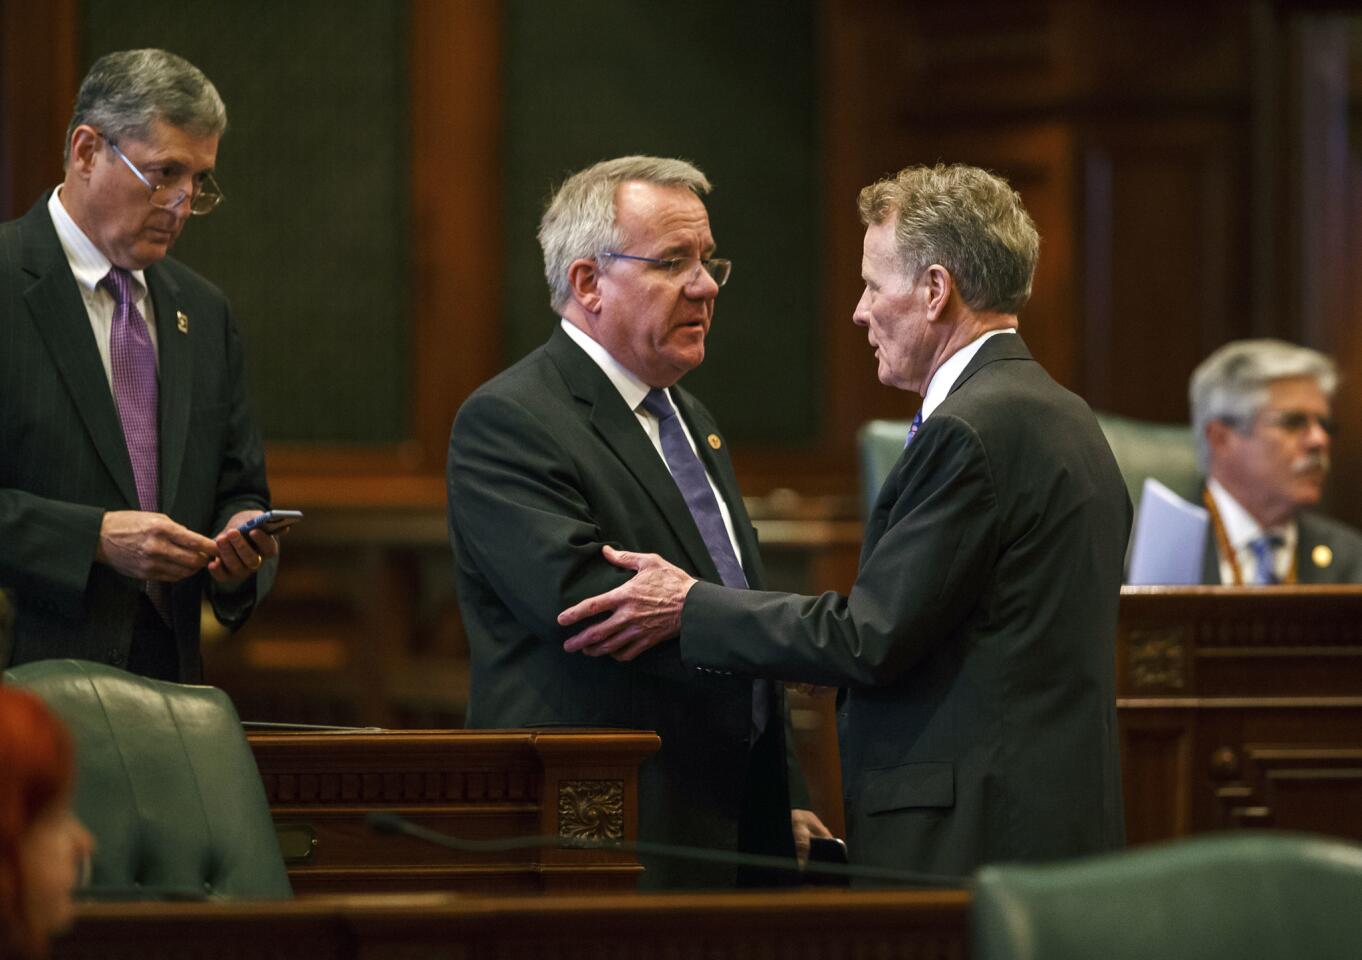 Illinois State Rep. Steve Andersson, R-Geneva, center, shakes hands with Illinois Speaker of the House Michael Madigan, D-Chicago, right, after the Illinois House voted to override Gov. Rauner's veto and pass a budget for the first time in two years during an overtime session at the Illinois State Capitol, Thursday, July 6, 2017, in Springfield, Ill.